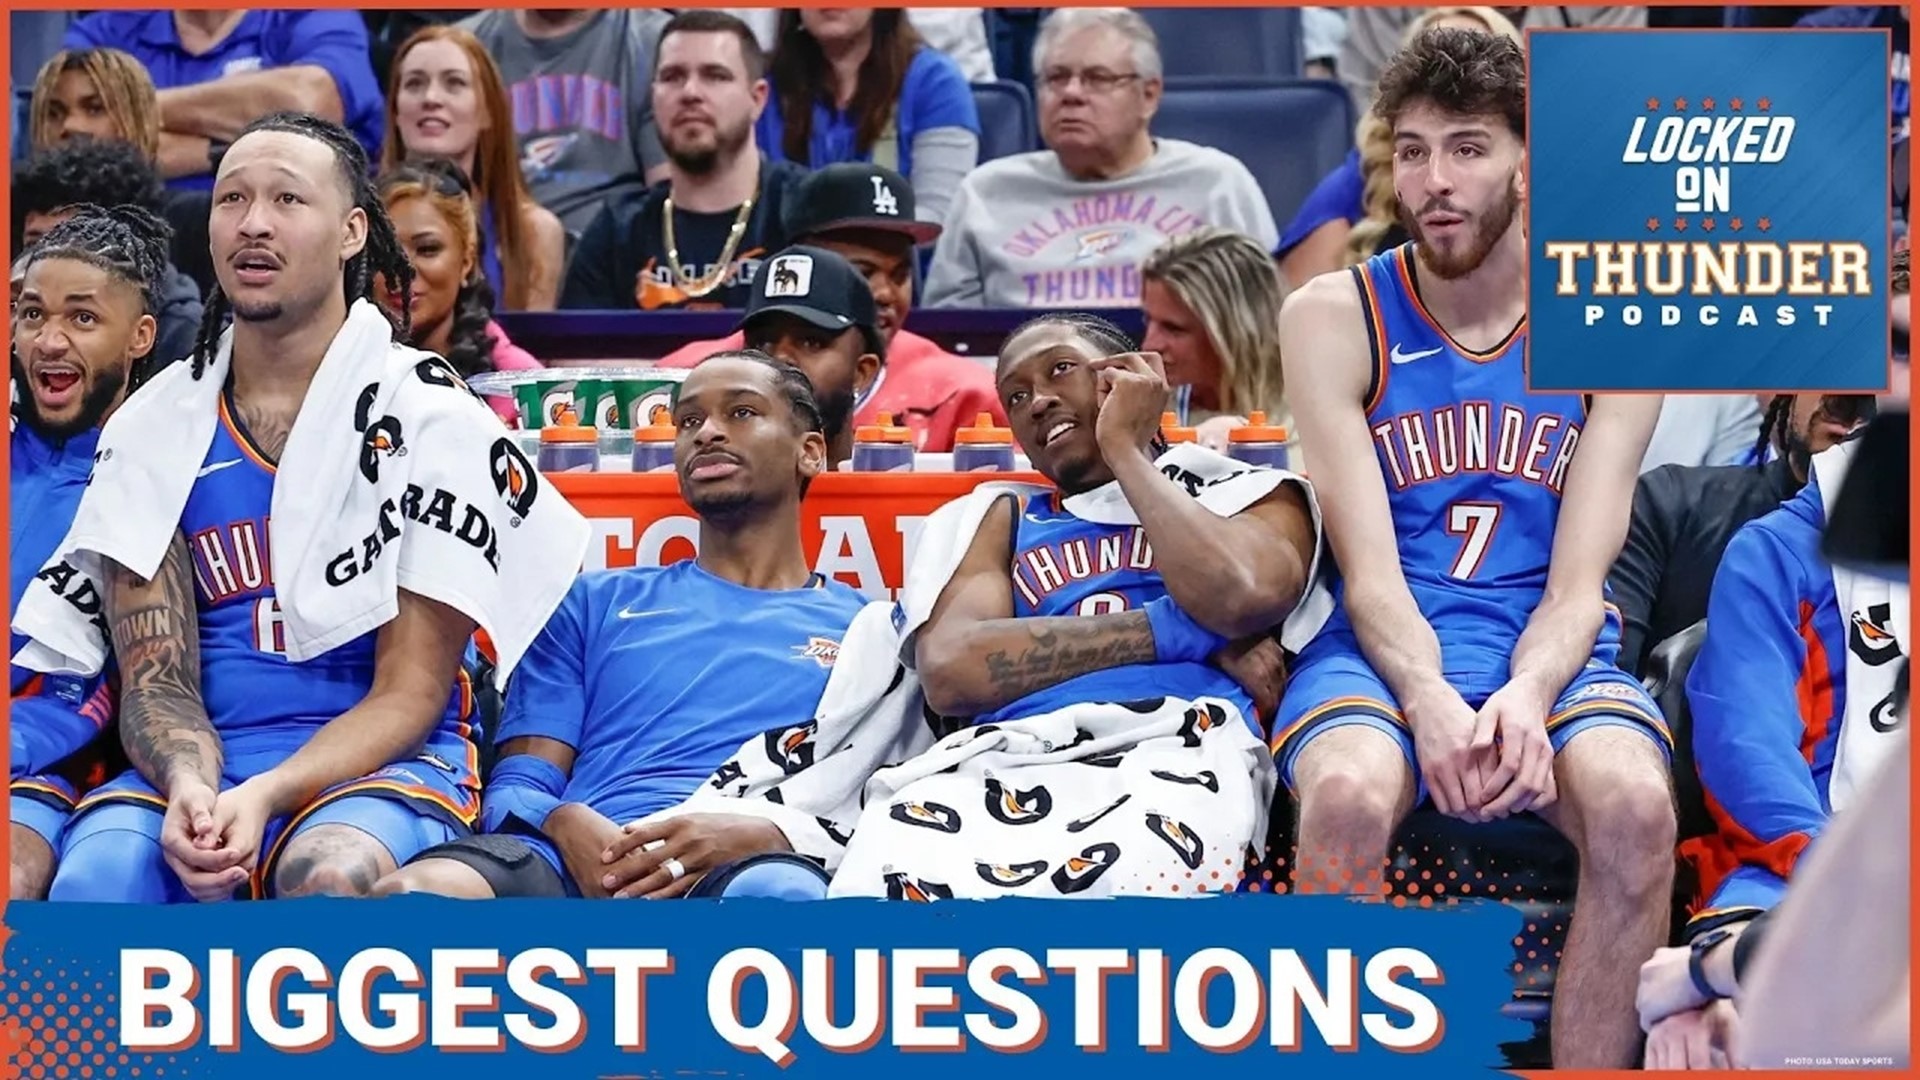 The Oklahoma City Thunder are set to make their maiden voyage to the NBA Playoffs on Sunday, what are the biggest questions the Thunder have to answer?